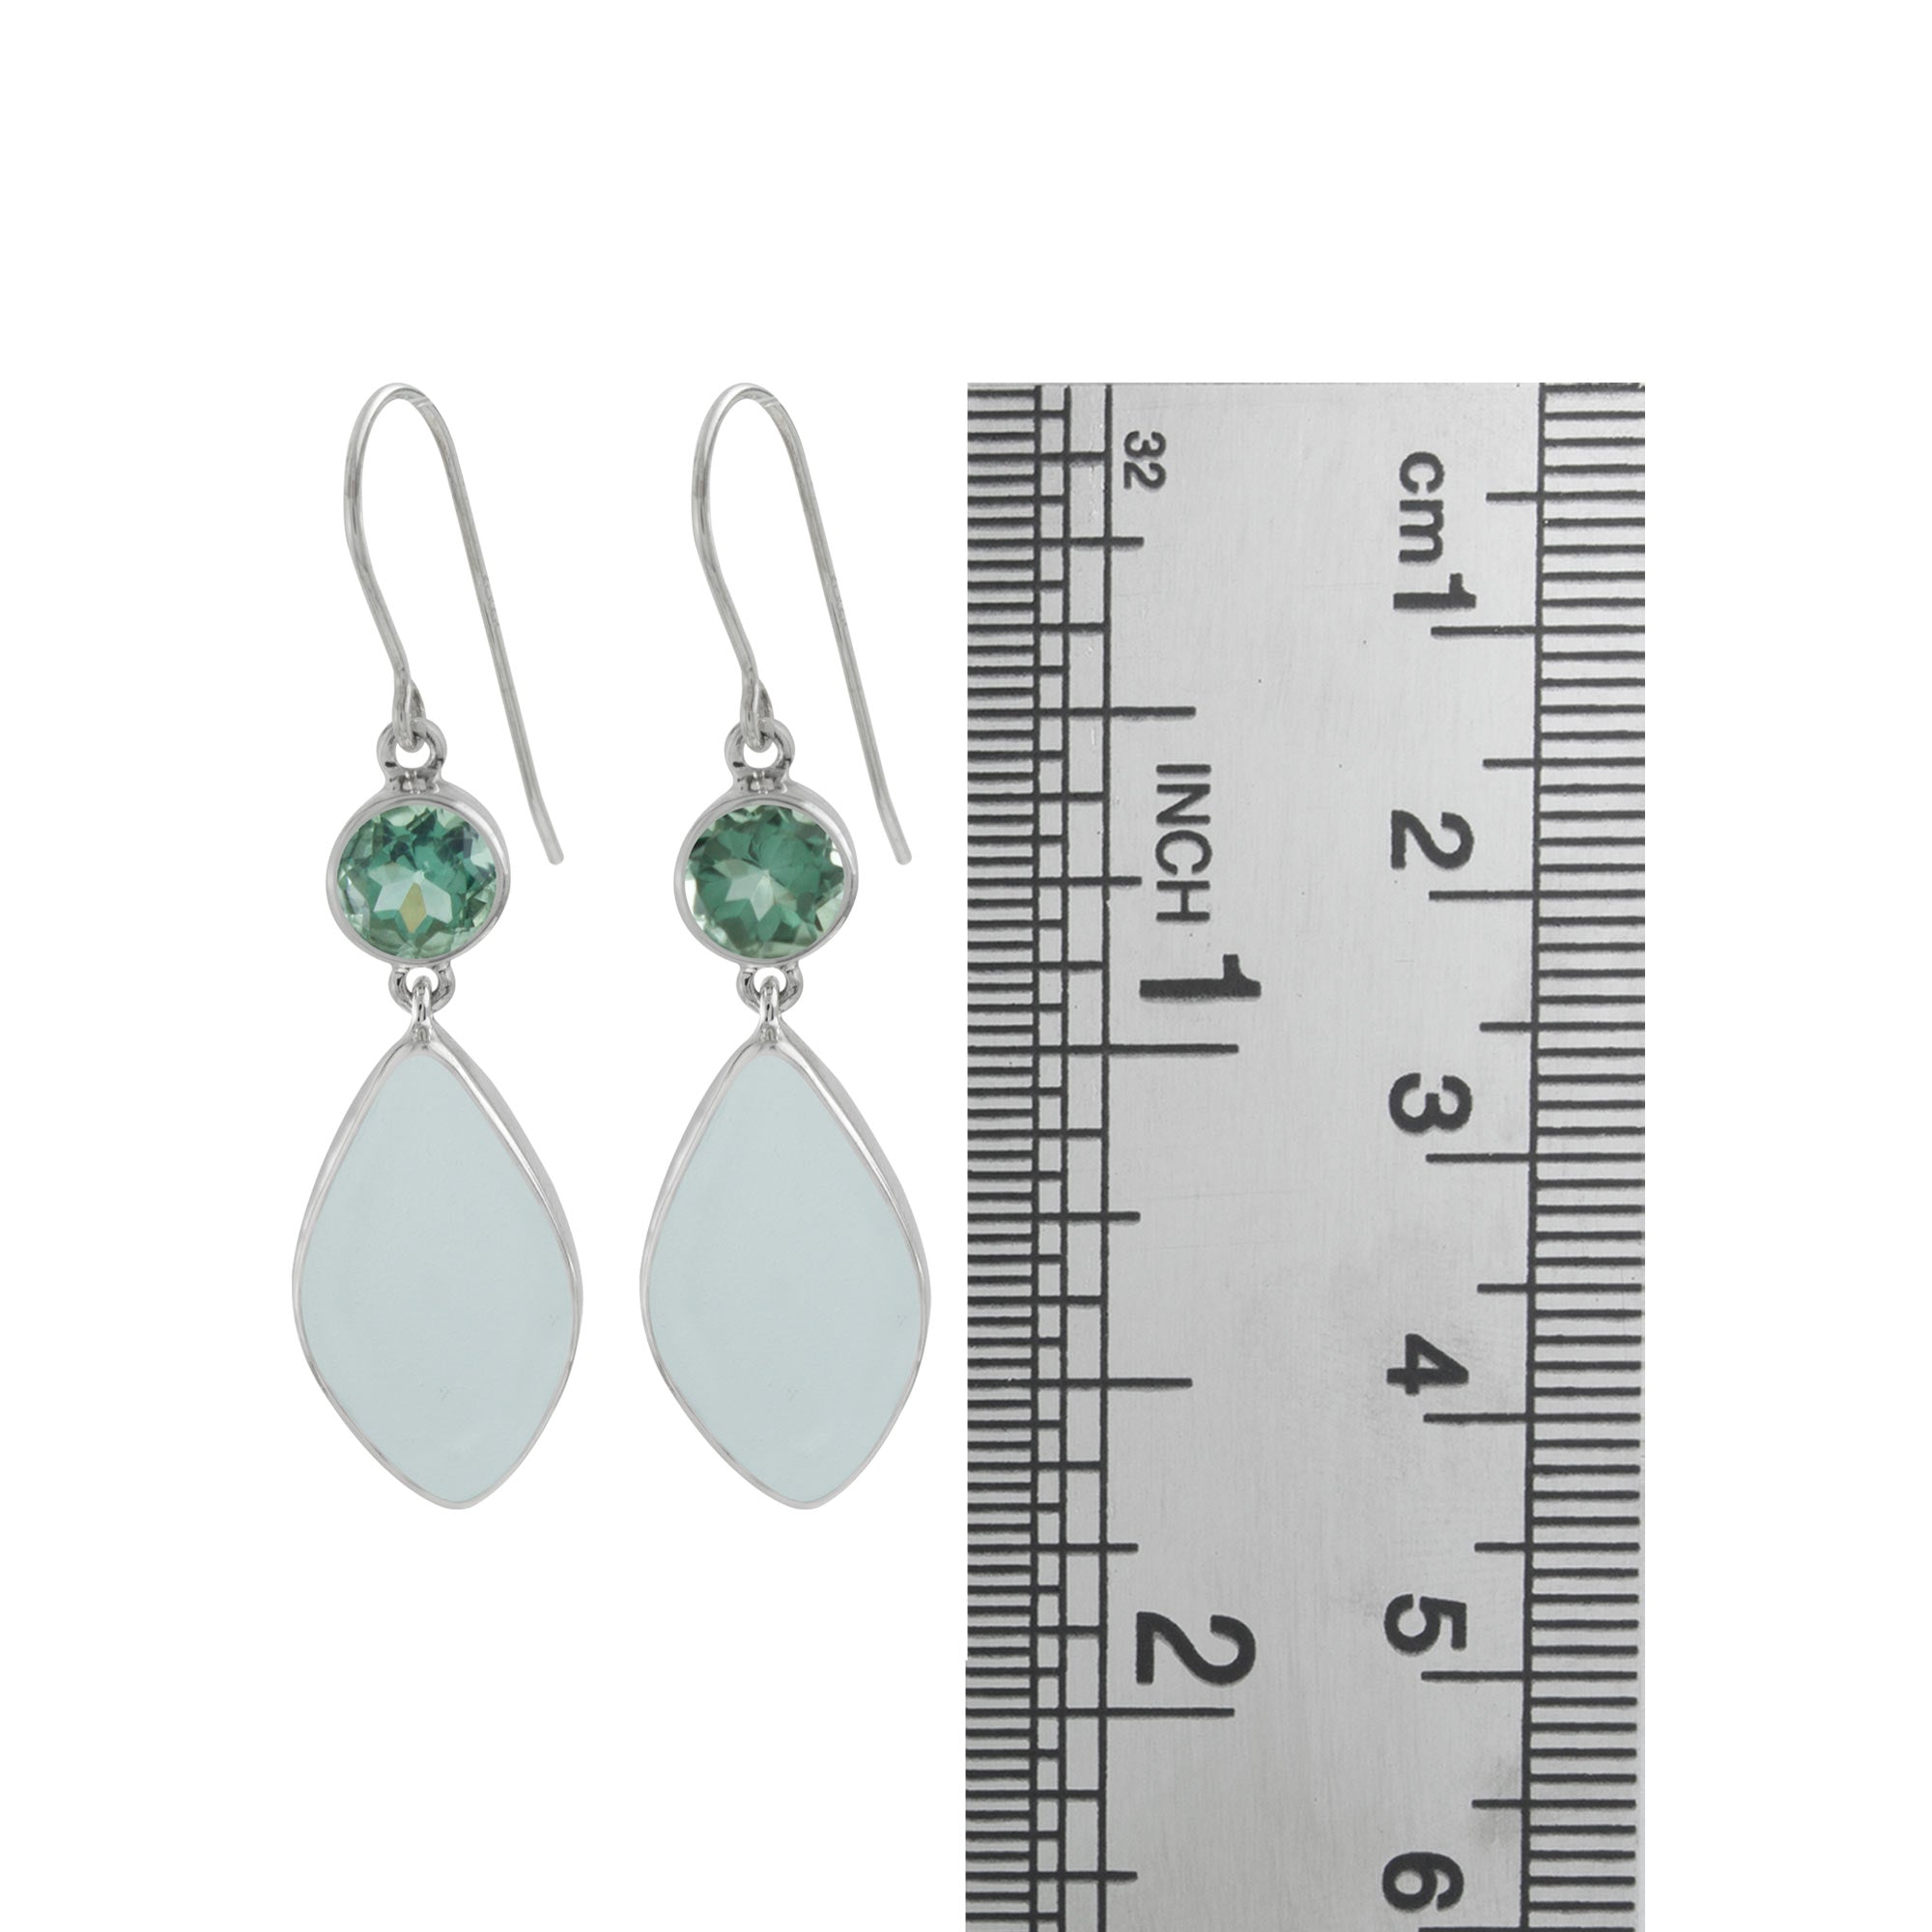 Sterling Silver Earring With Green Quartz Round Facet, Sea Glass Aqua